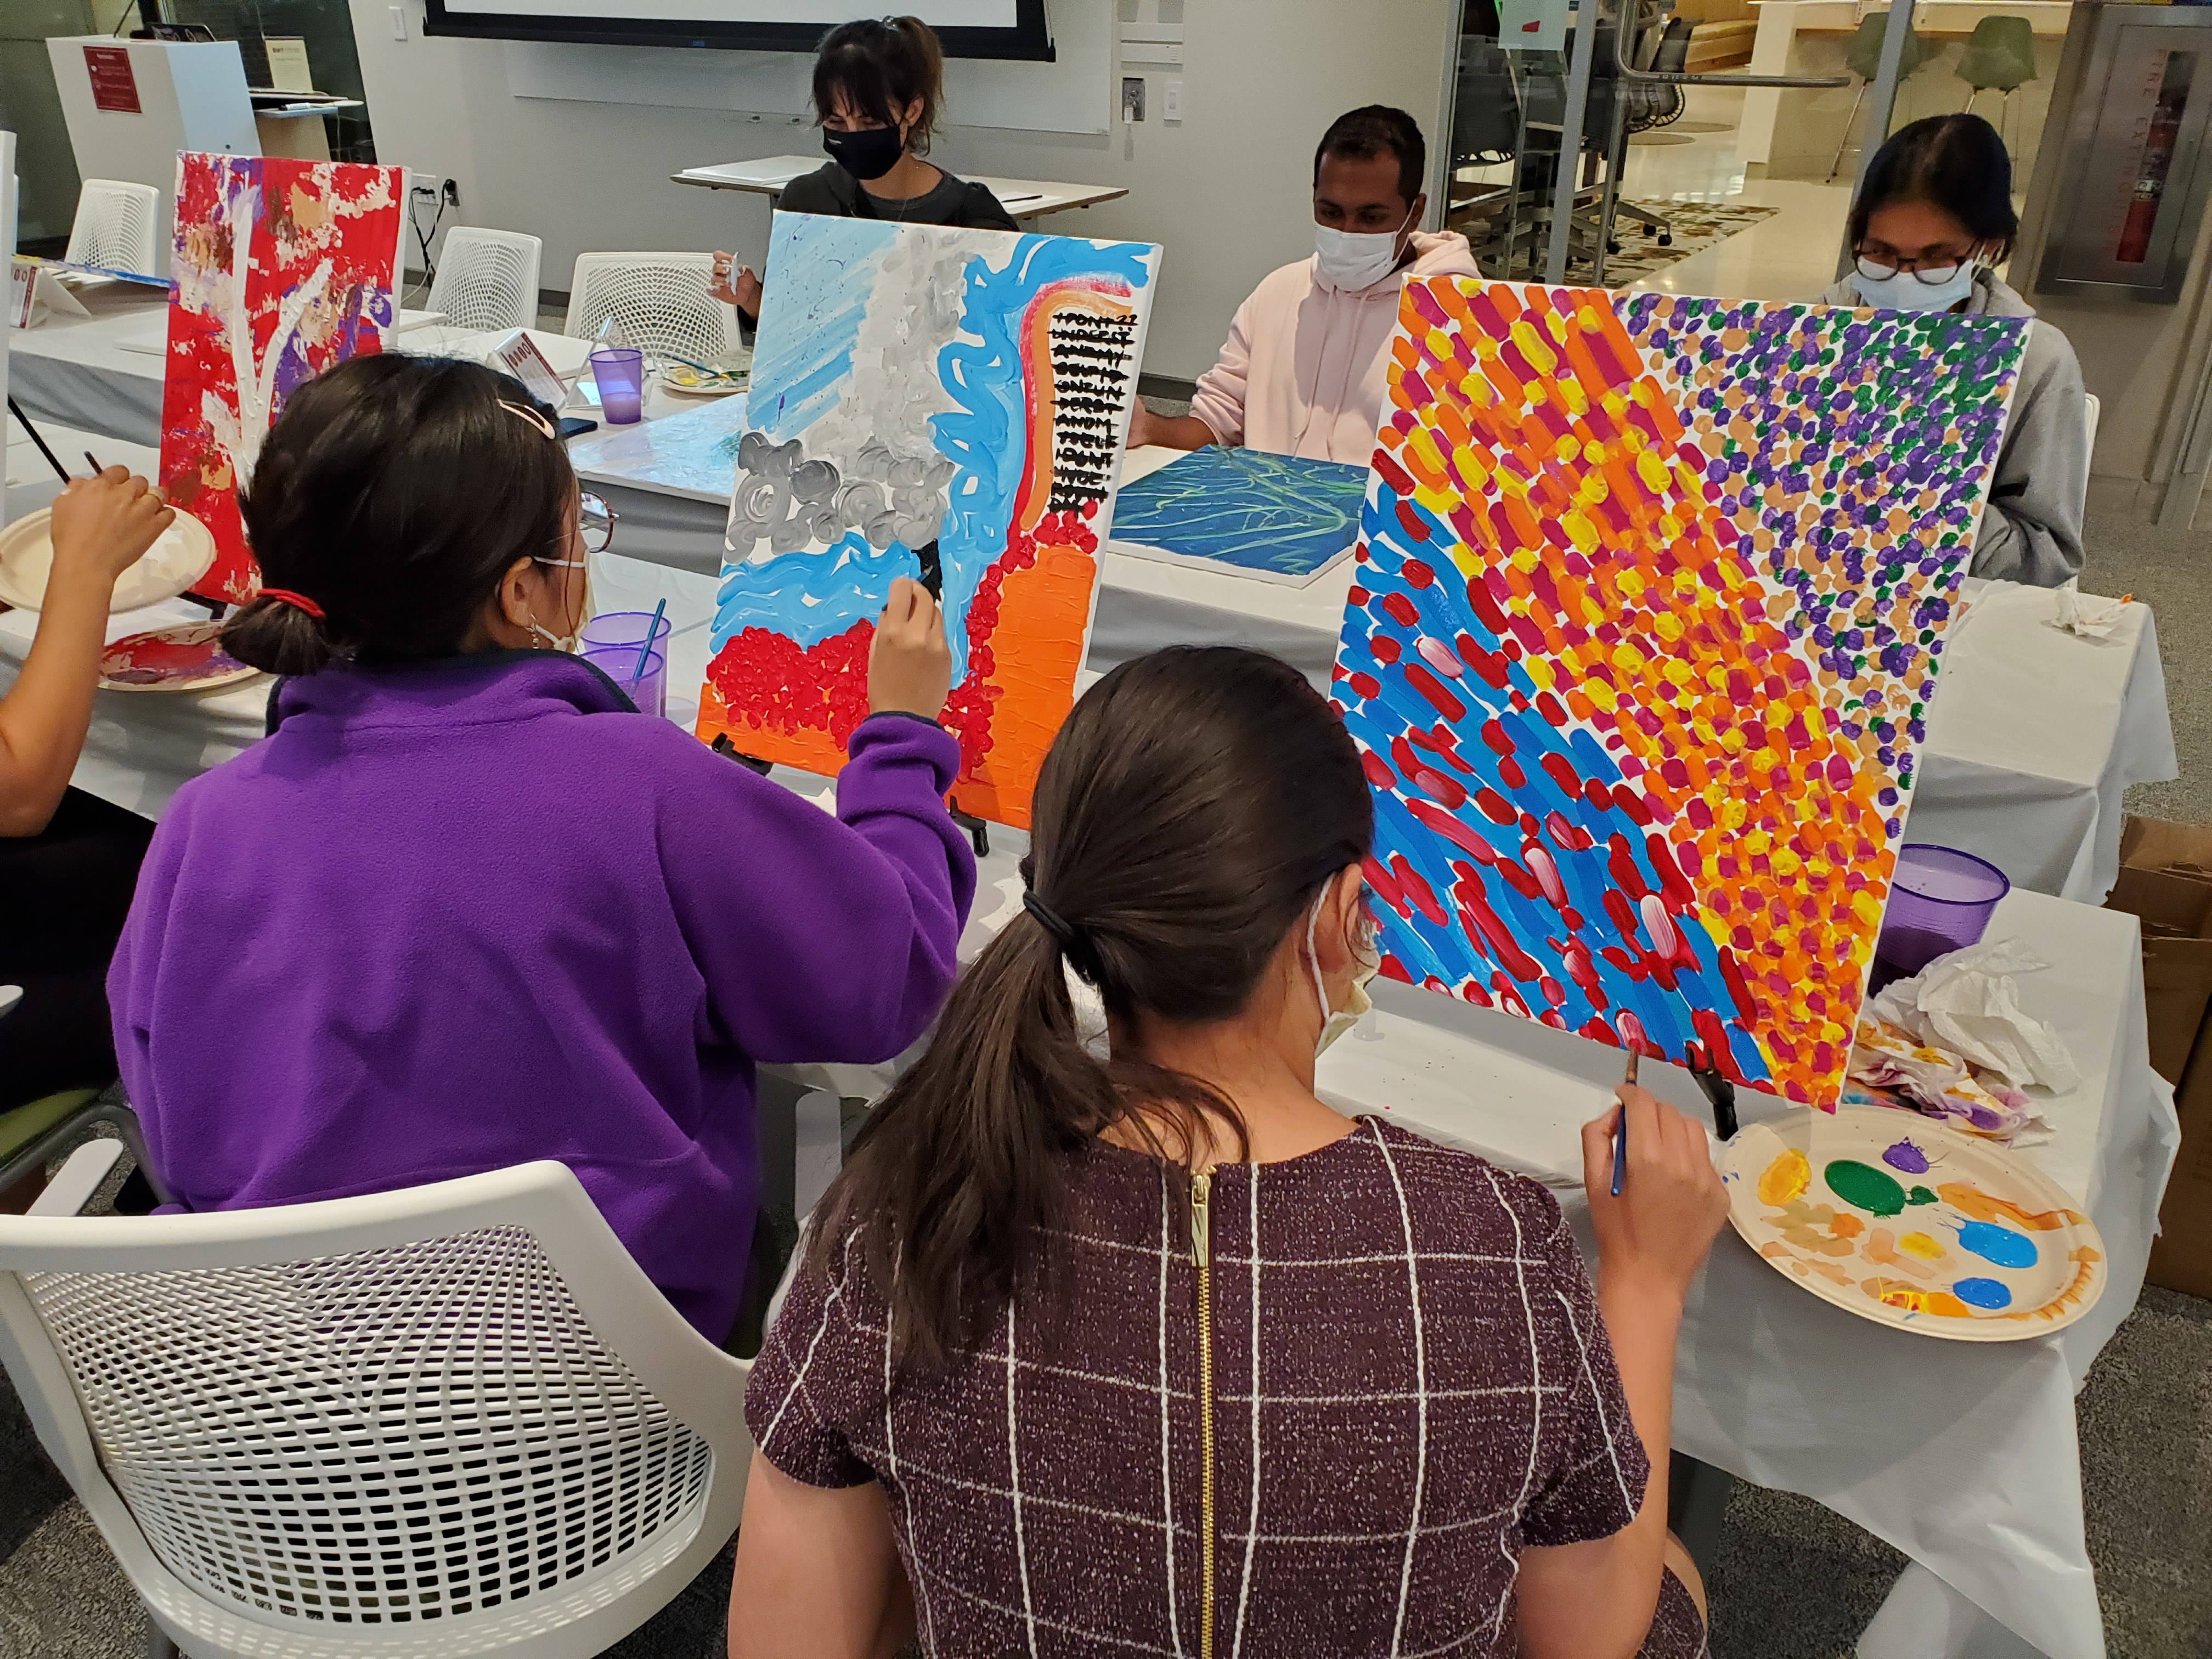 Students painting bright, abstract designs on canvas in a Countway classroom.